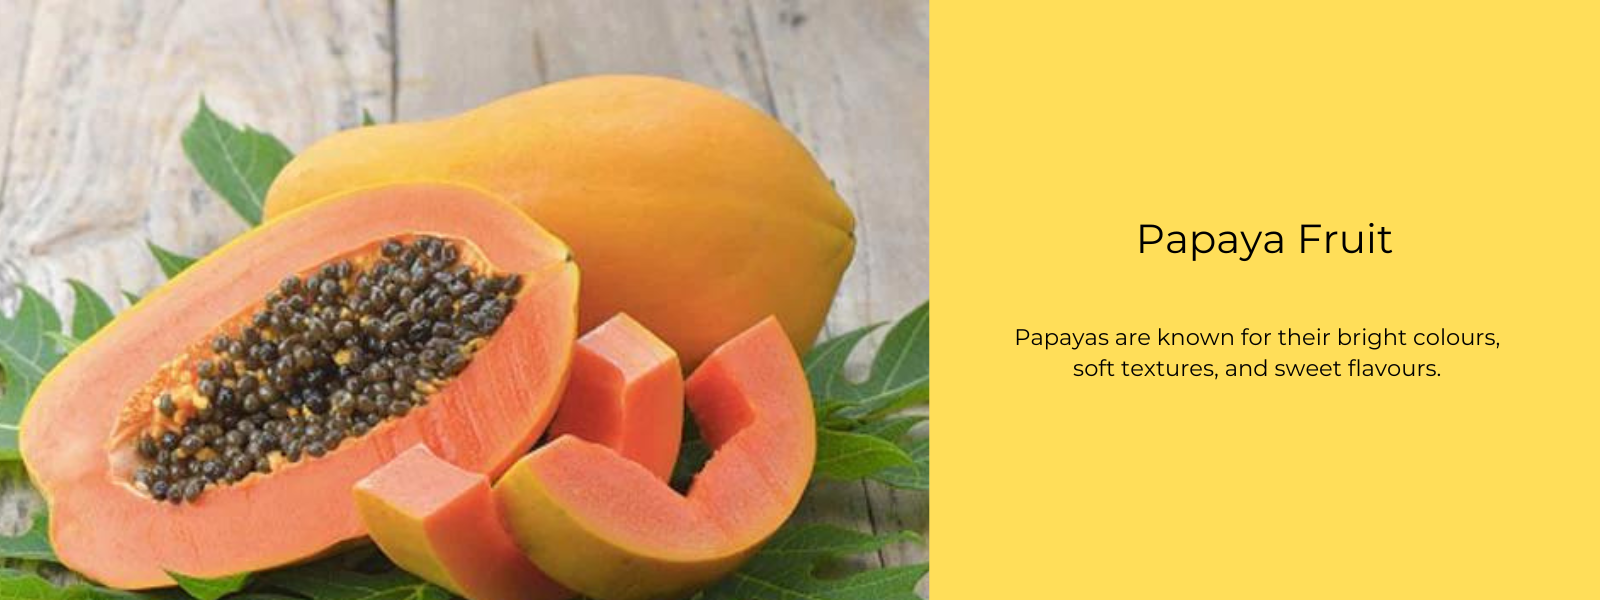 Papaya Fruit - Health Benefits, Uses and Important Facts